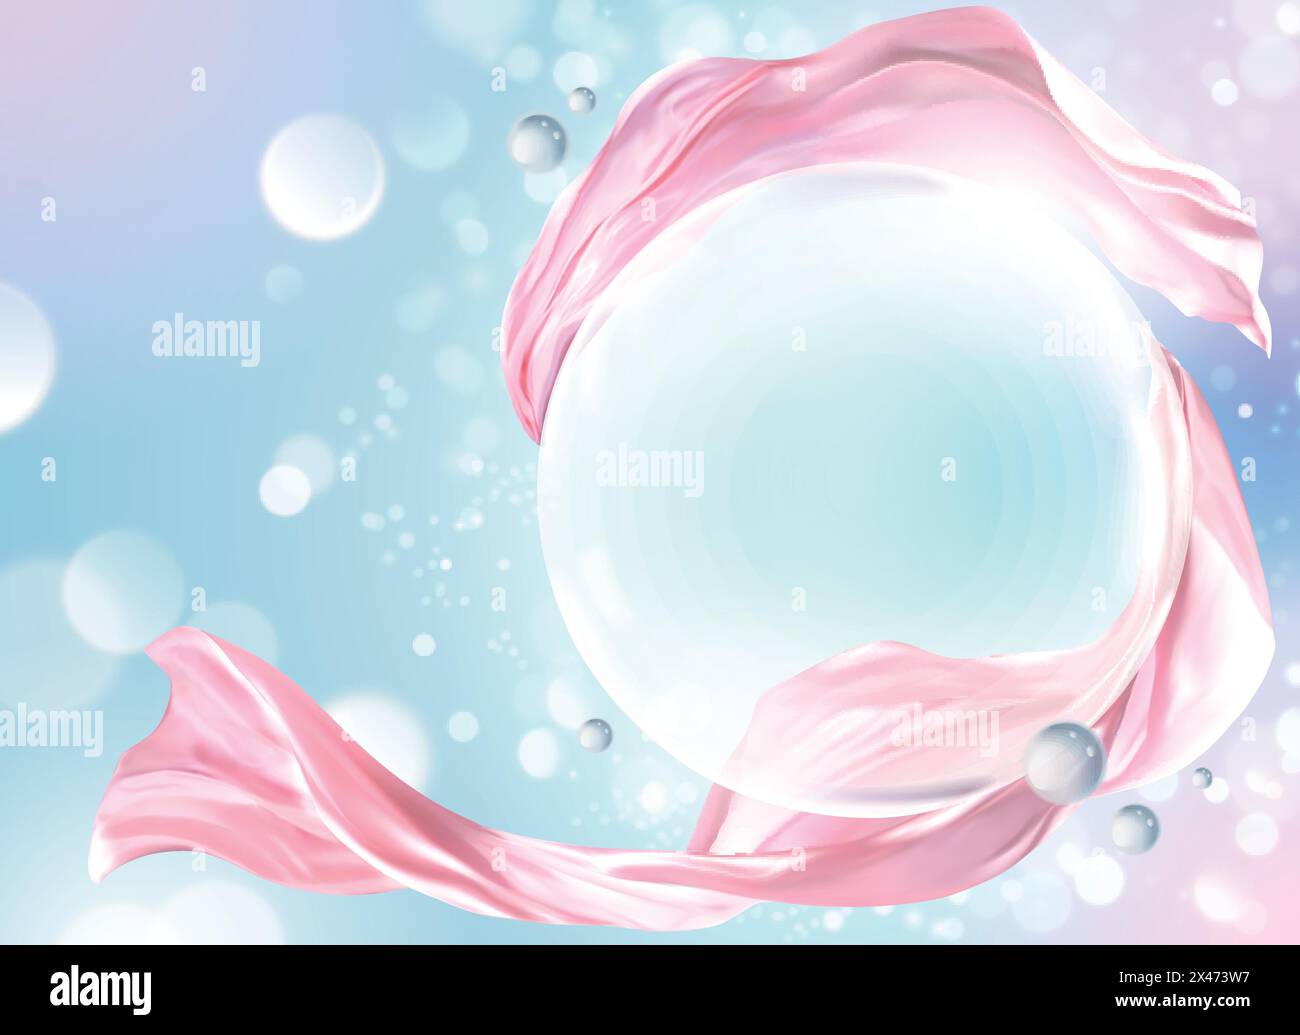 Dreamy decorative design, bubbles and pink satin on glowing colorful background Stock Vector